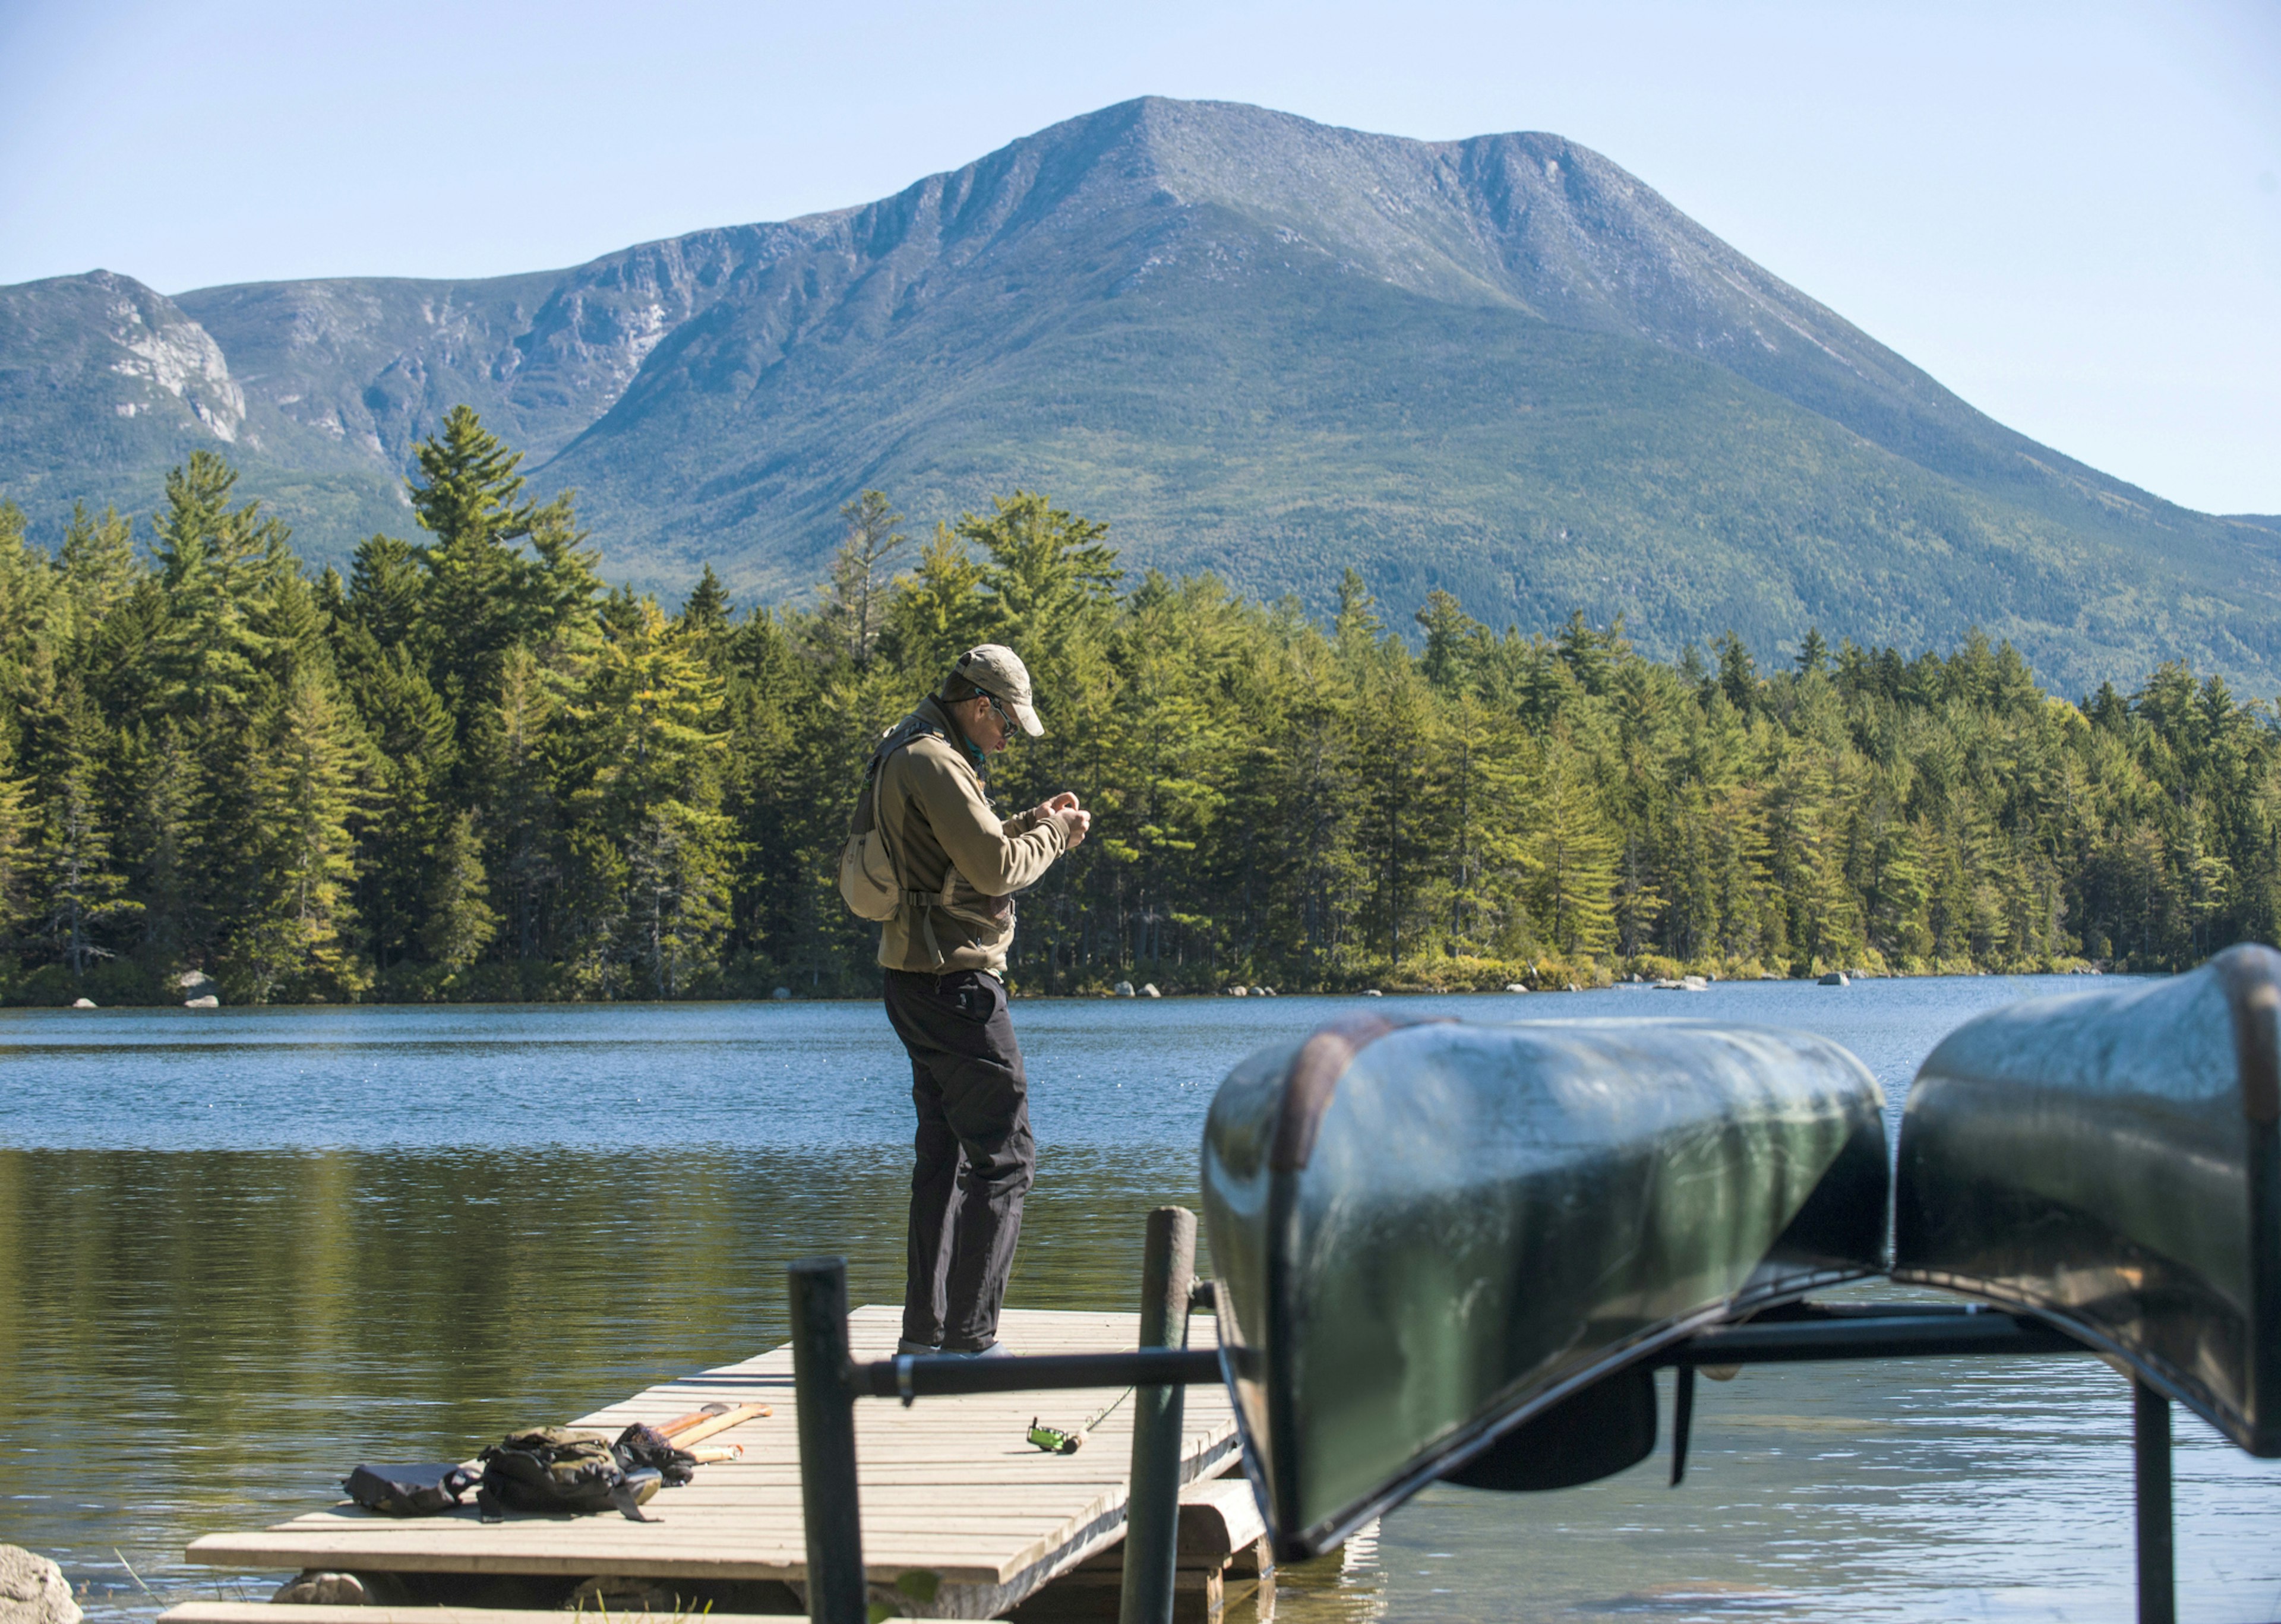 Fly Fisherman getting his gear ready on the dock at Kidney Pond in Baxter State Park, Maine 